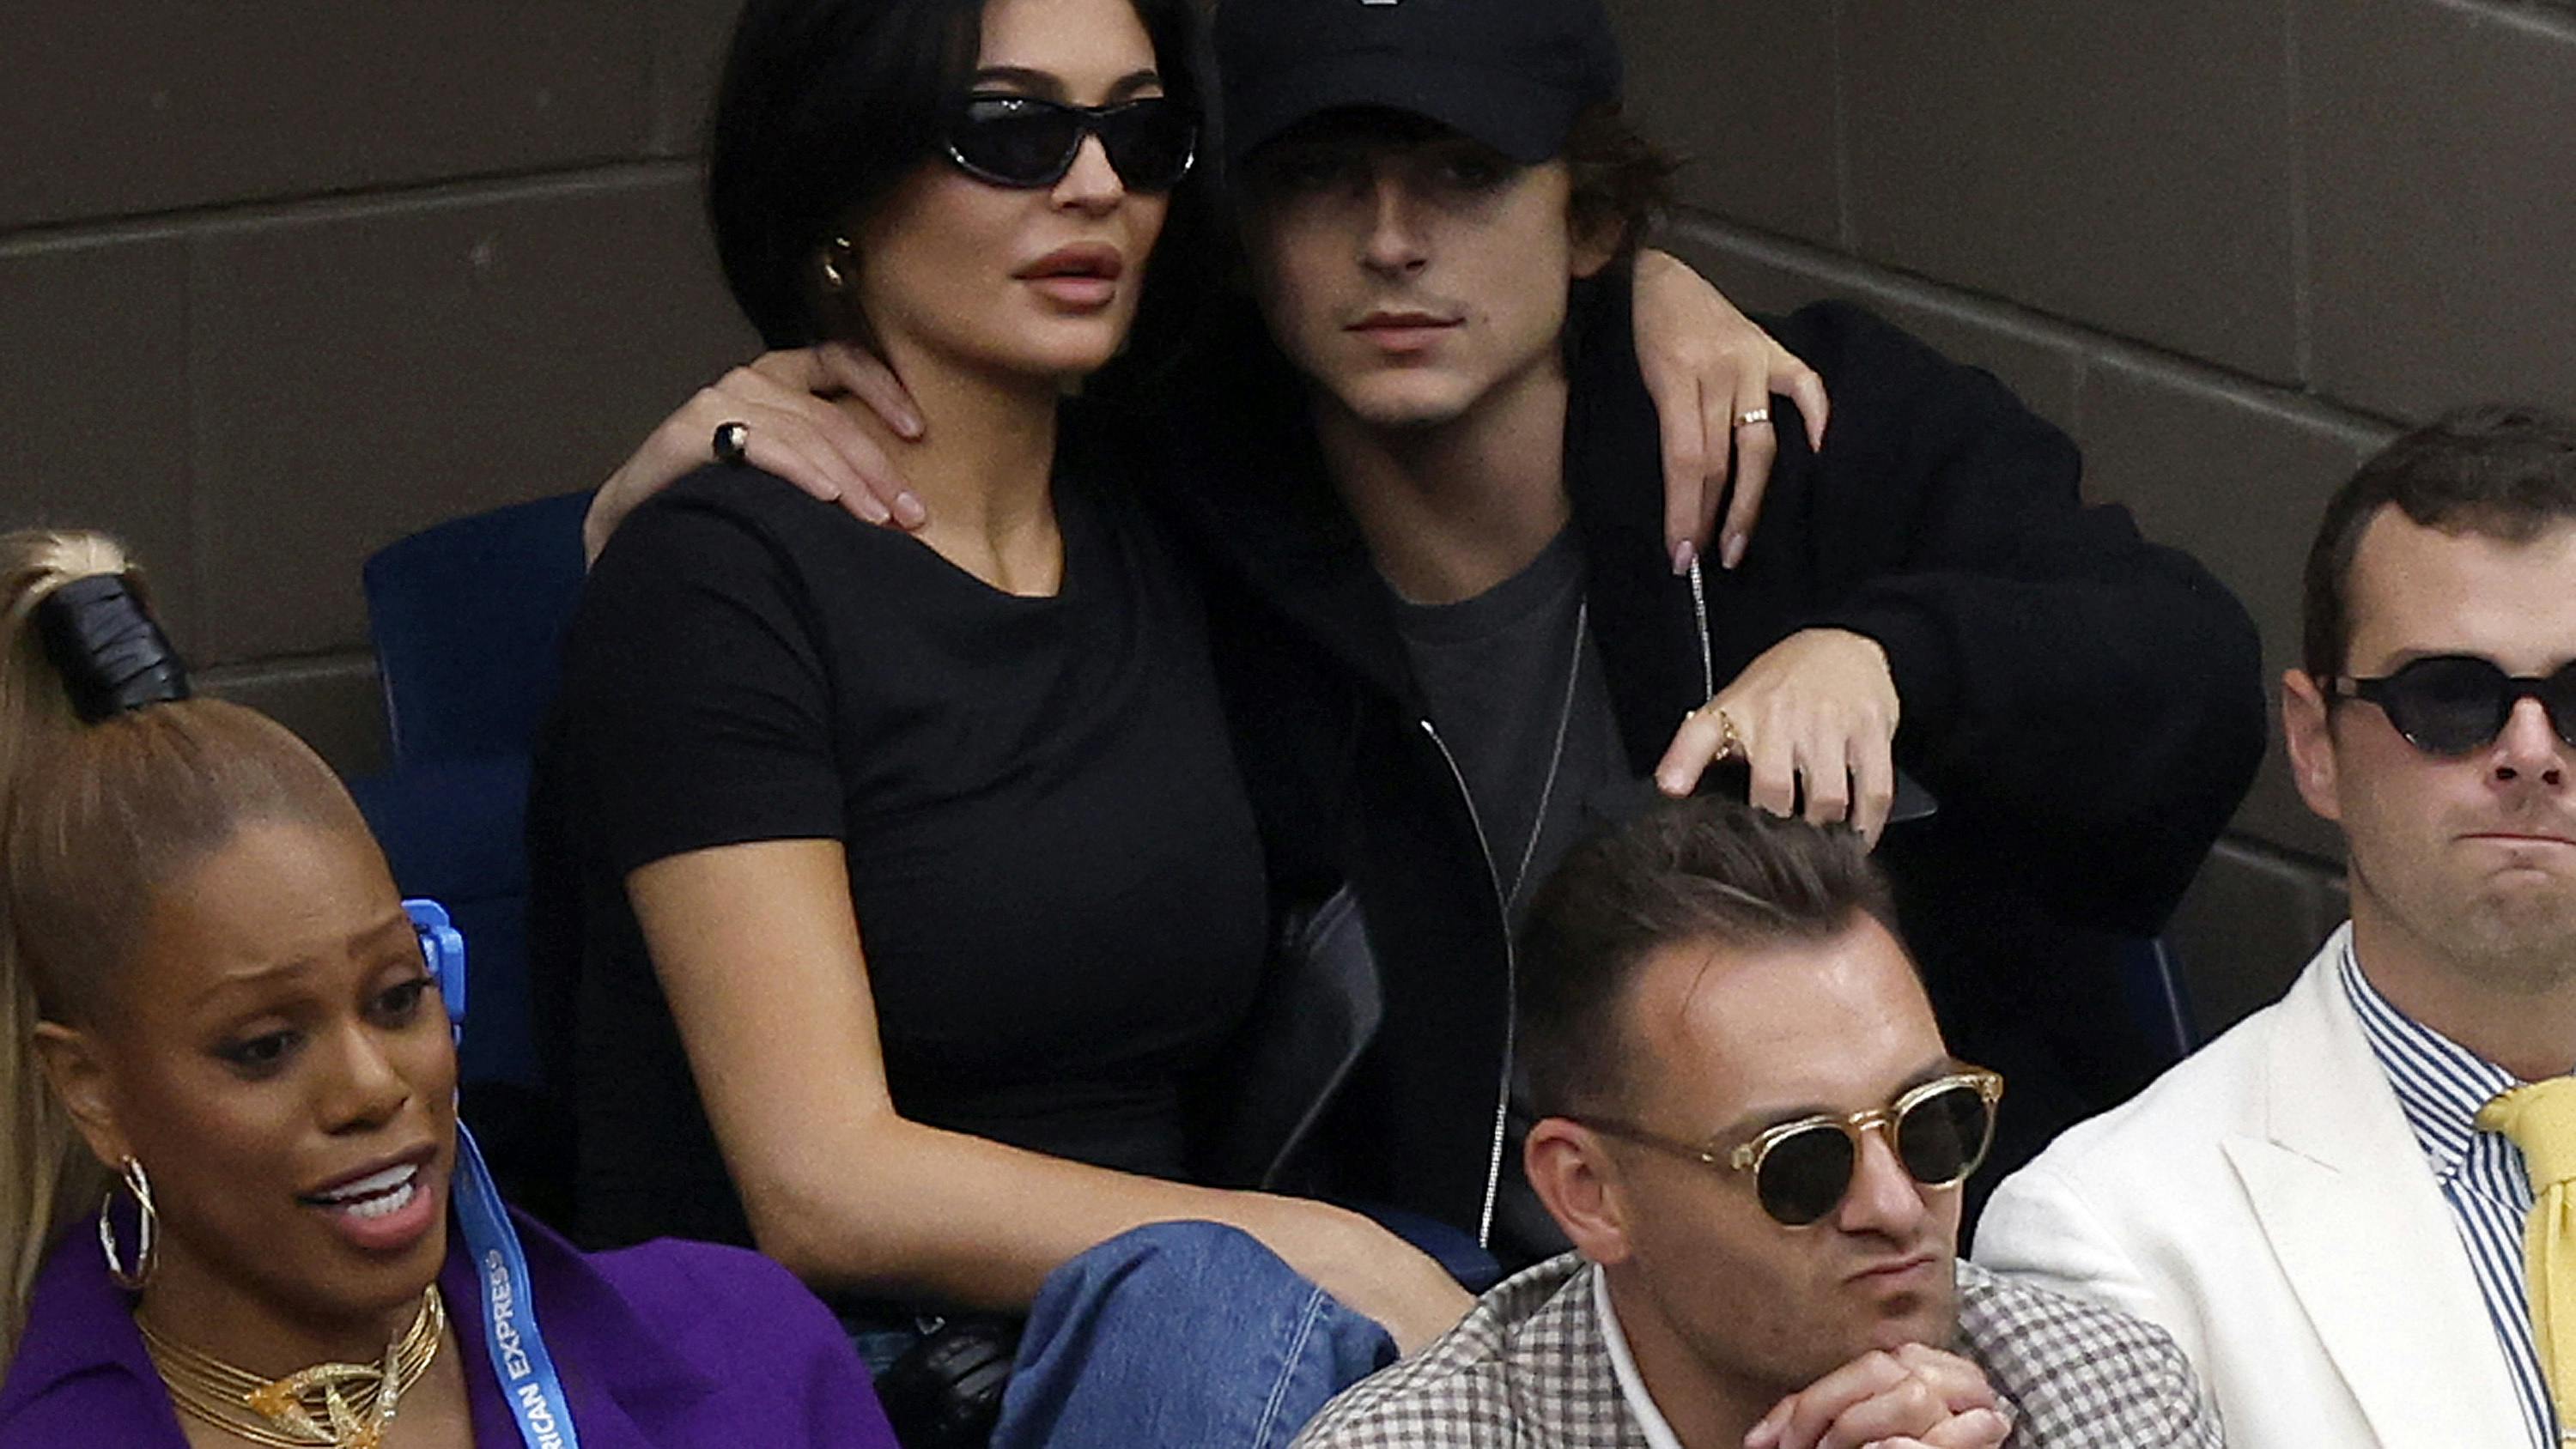 NEW YORK, NEW YORK - SEPTEMBER 10: American socialite Kylie Jenner and American-French actor Timothée Chalamet look on during the Men's Singles Final match between Novak Djokovic of Serbia and Daniil Medvedev of Russia on Day Fourteen of the 2023 US Open at the USTA Billie Jean King National Tennis Center on September 10, 2023 in the Flushing neighborhood of the Queens borough of New York City. Sarah Stier/Getty Images/AFP (Photo by Sarah Stier / GETTY IMAGES NORTH AMERICA / Getty Images via AFP)